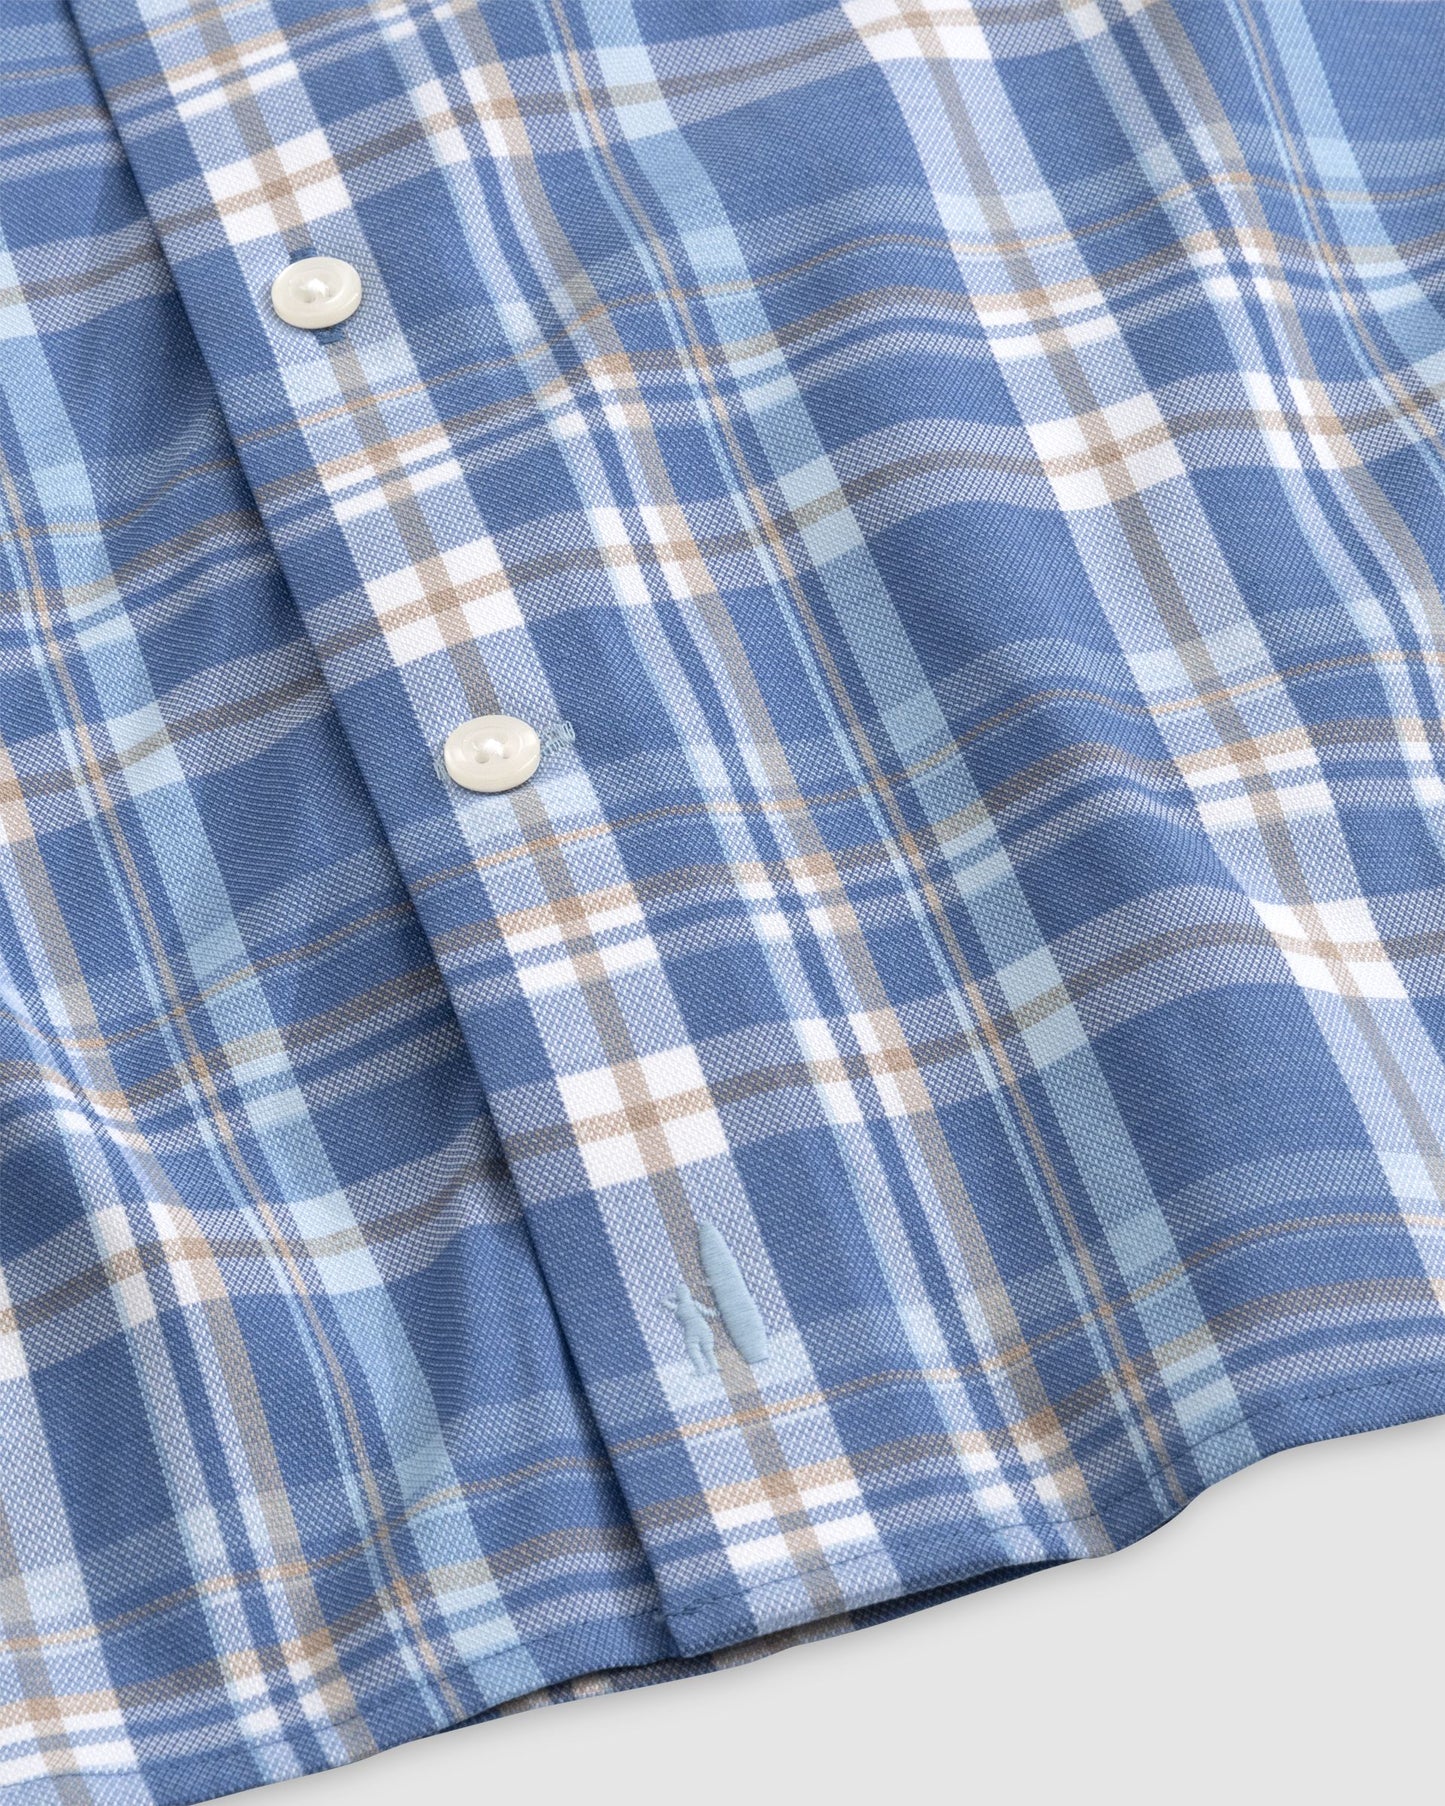 Load image into Gallery viewer, Lassen Performance Button Up Shirt
